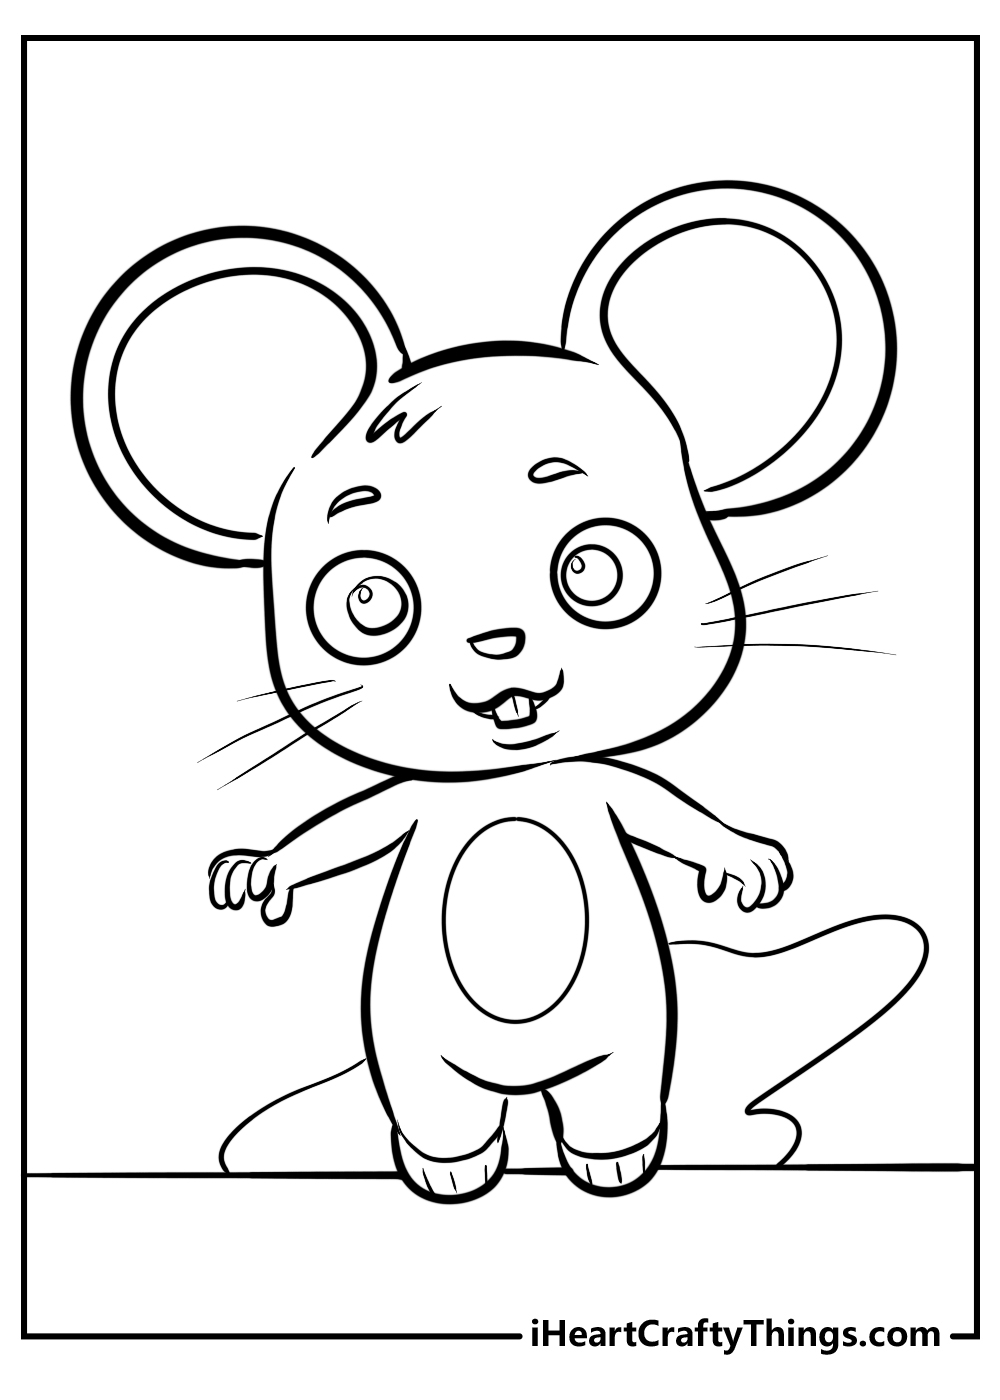 CoComelon Coloring Page - Get Coloring Pages